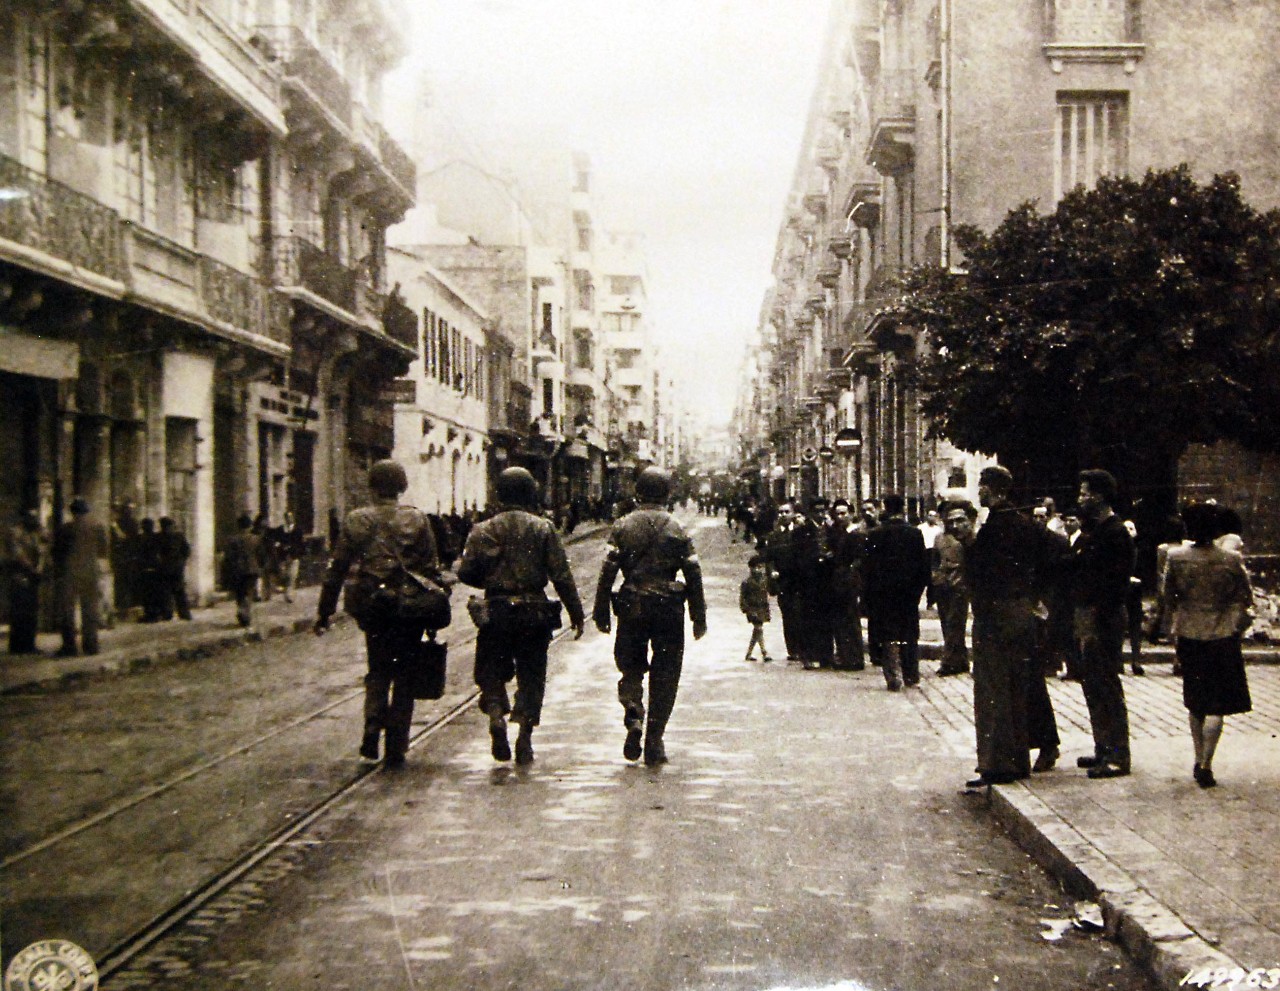 LC-Lot-11582-11: Operation Torch, November 1942. Americans walking down a street in Oran, North Africa, 1942.  U.S. Army Signal Corps Photograph SC-149963, released December 21, 1942.   Courtesy of the Library of Congress. Photographed through Mylar sleeve.  (2016/05/27).